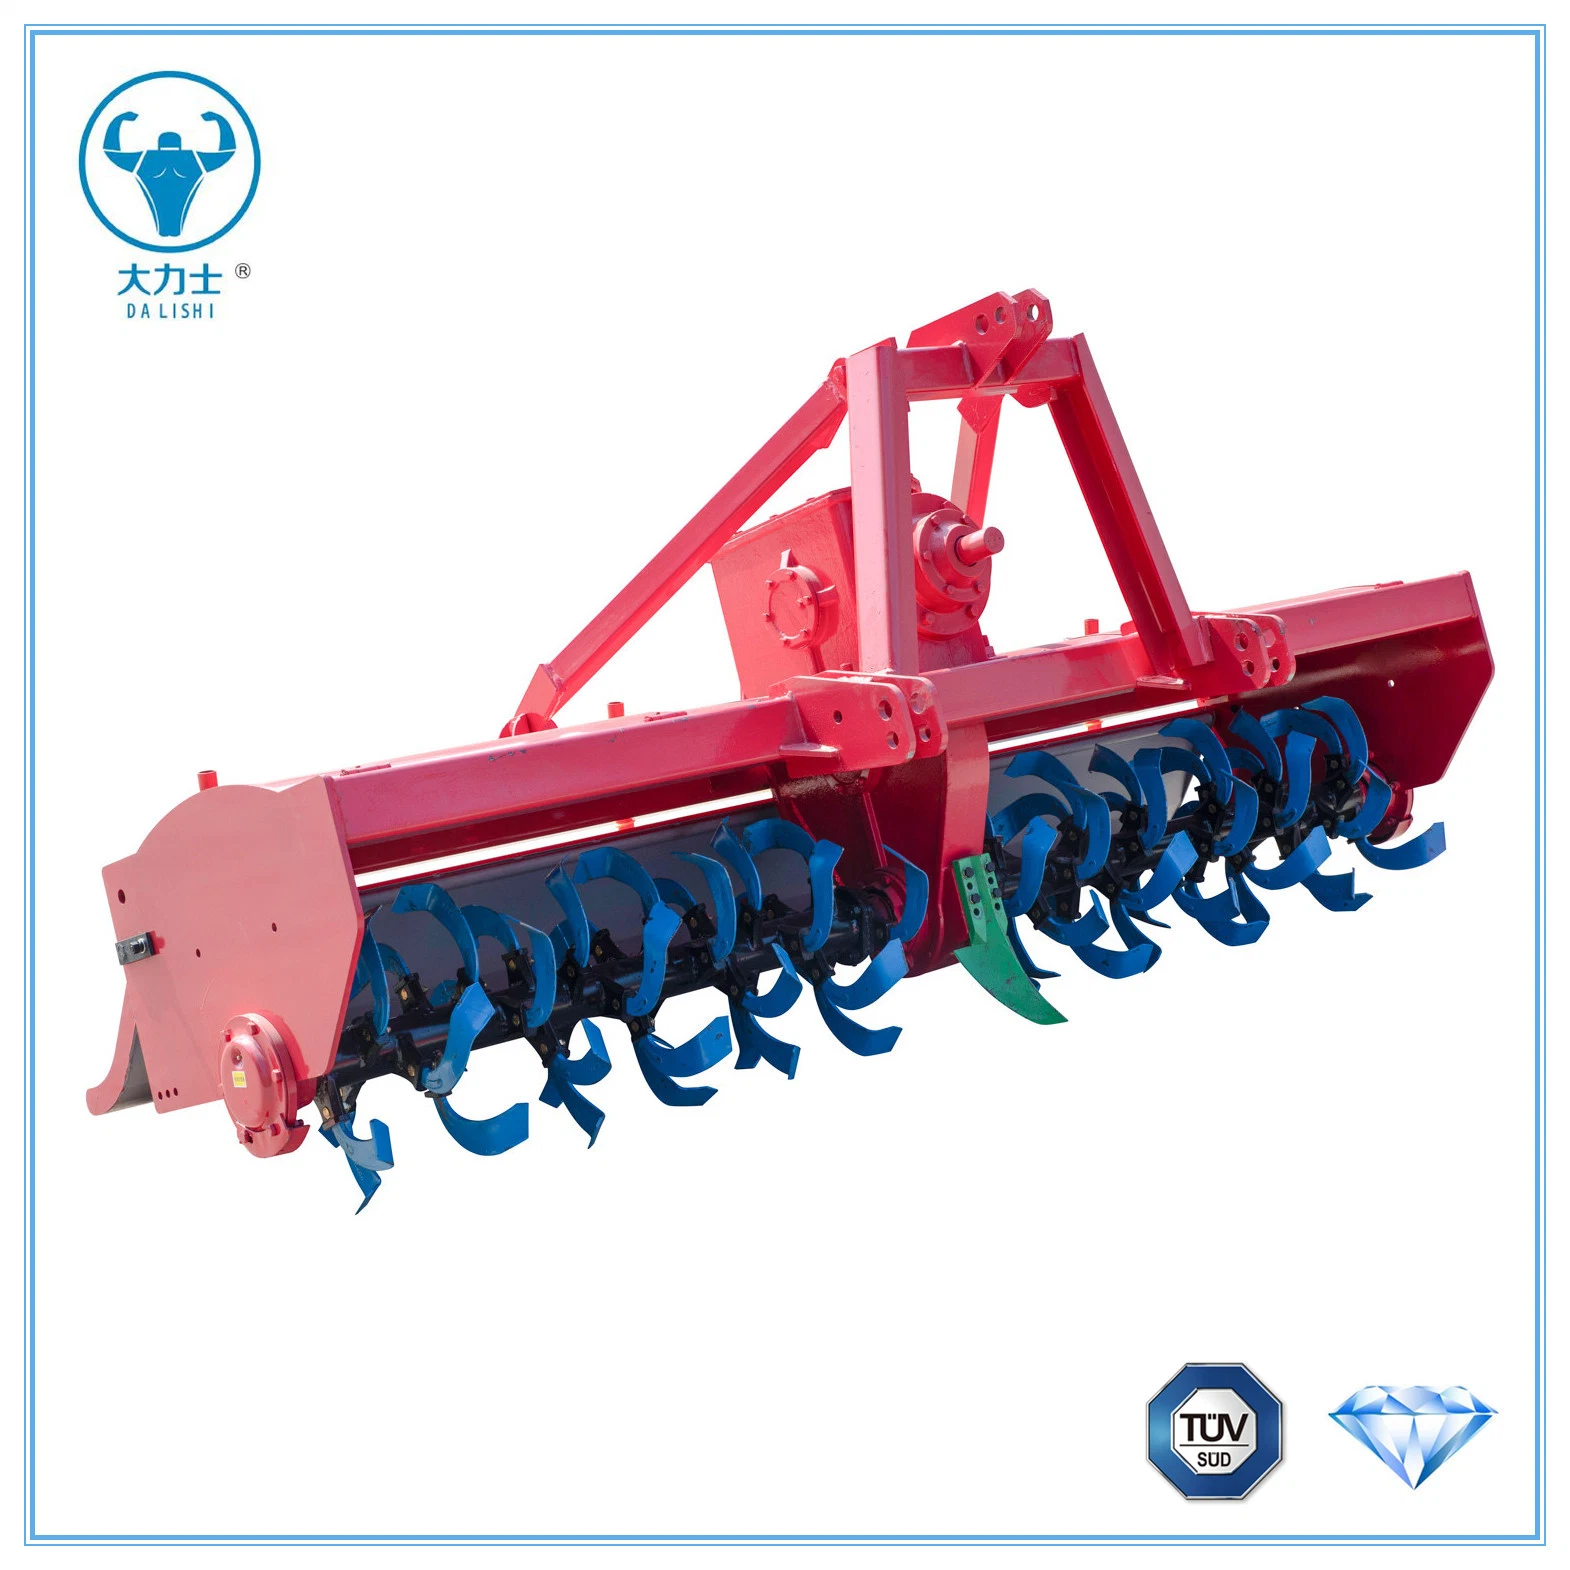 Rotary Tiller with Super Crushing Capacity.